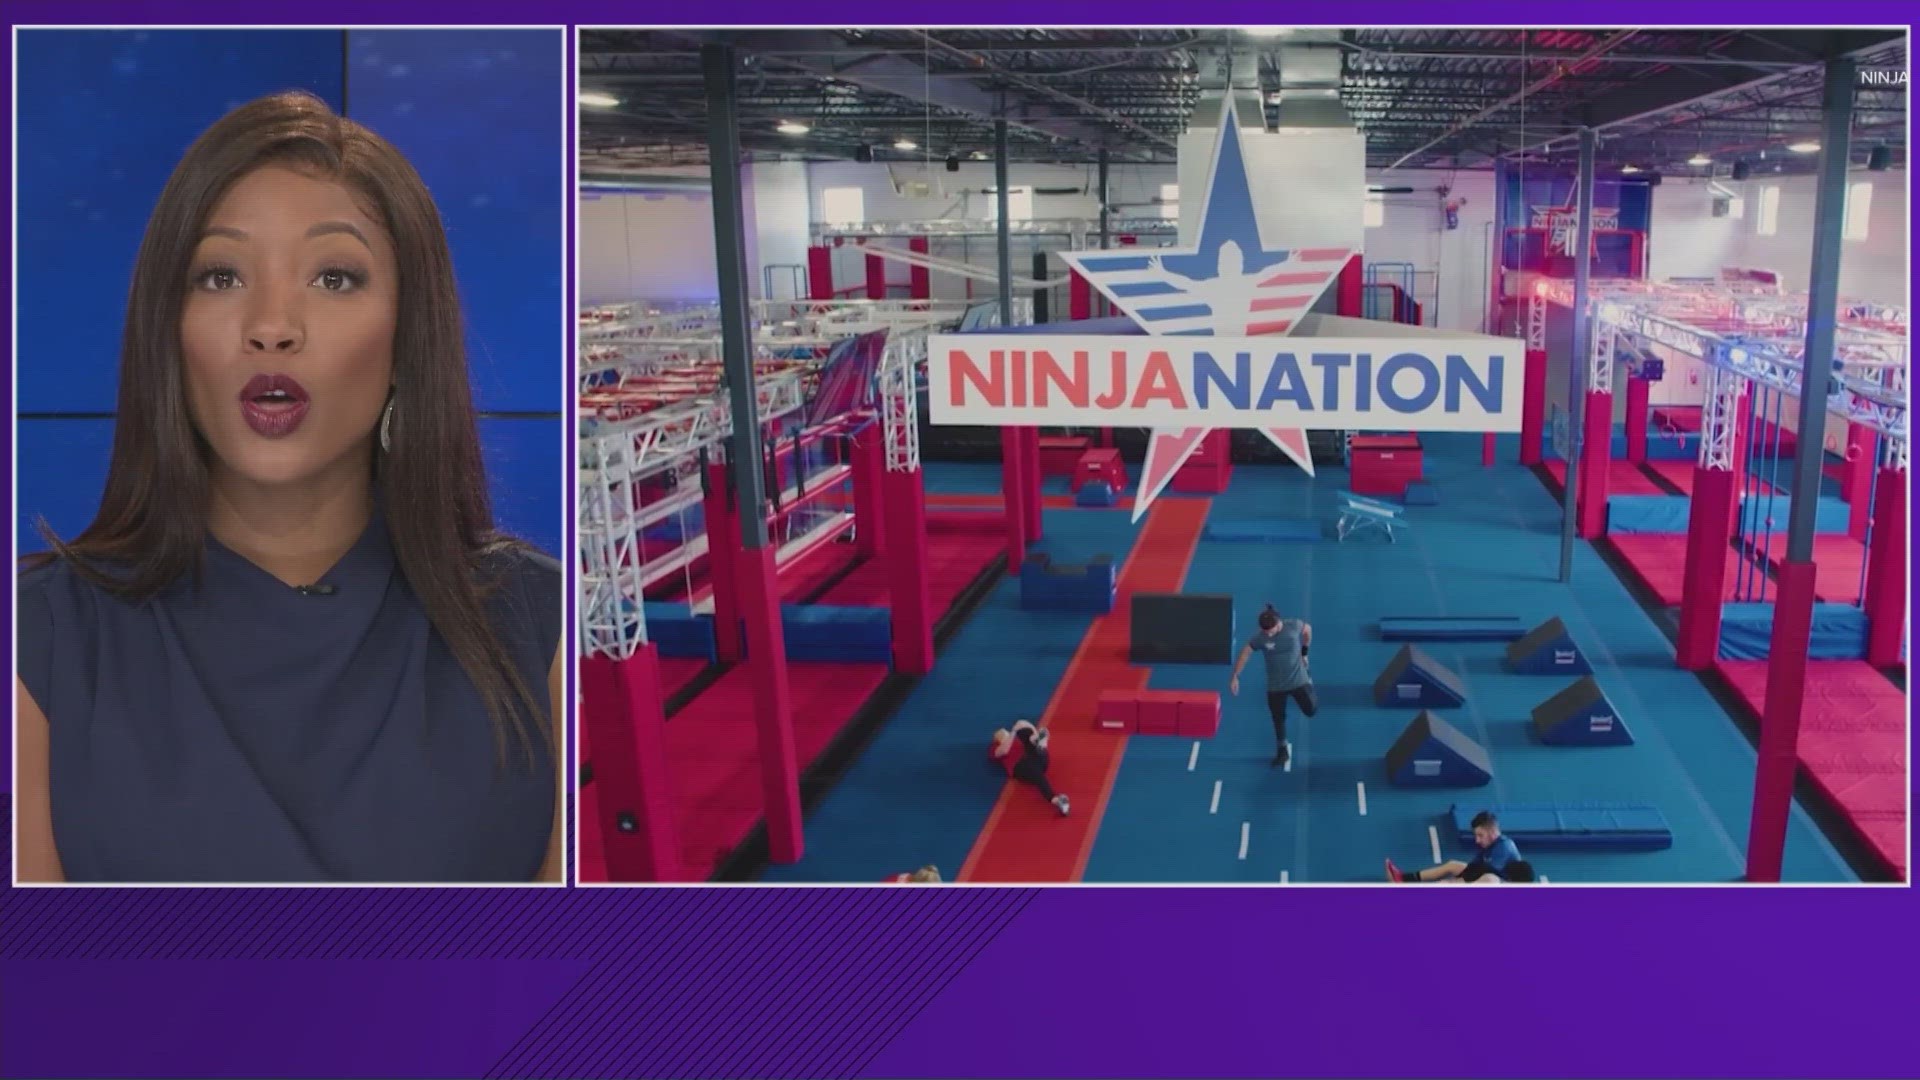 Wannabe Ninja Warriors will have a gym to go to and train.